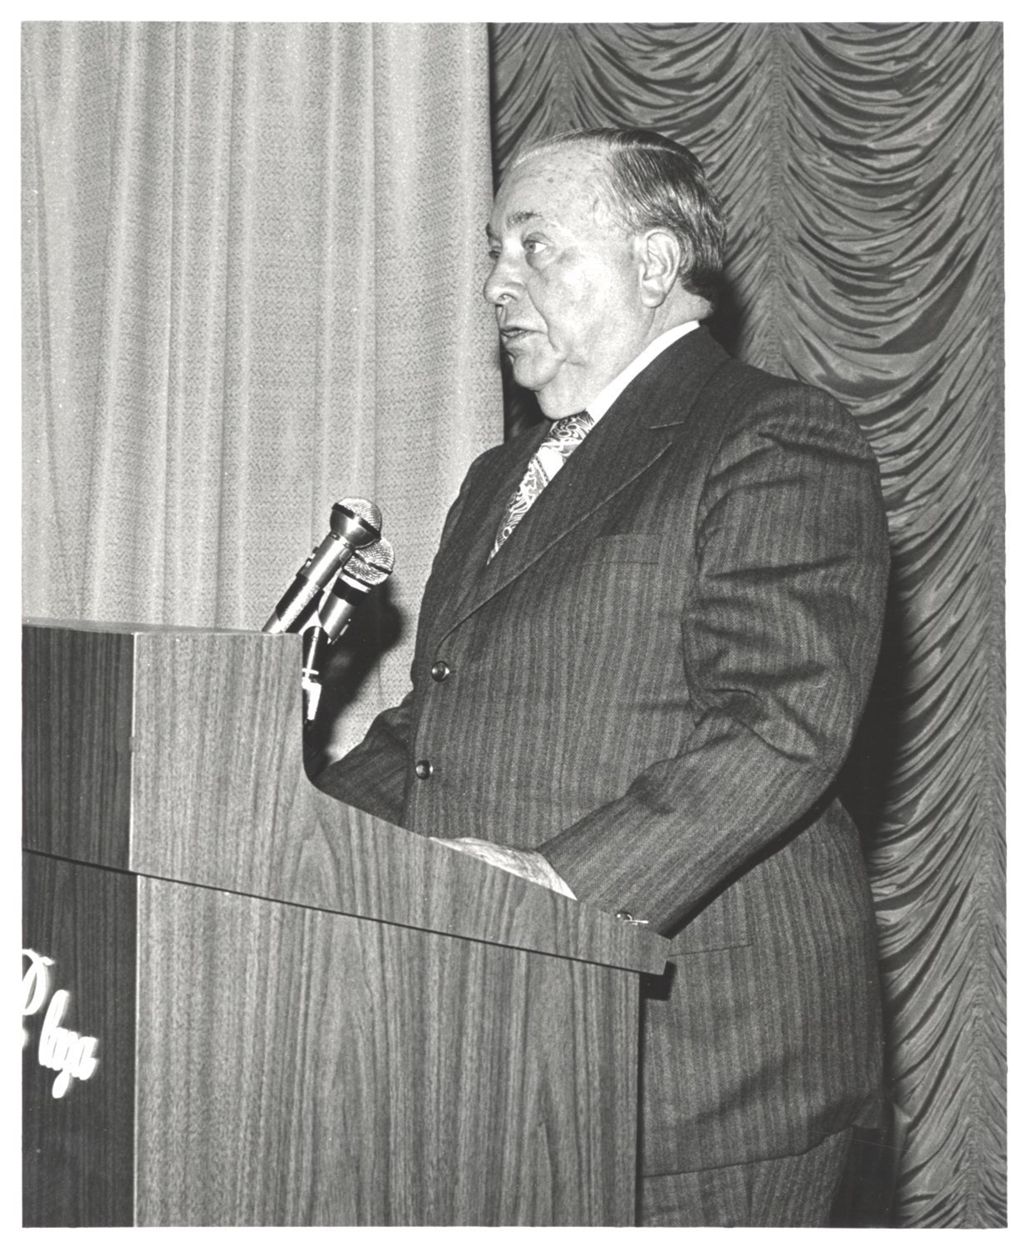 Illinois Business Hall of Fame Banquet, Richard J. Daley speaking